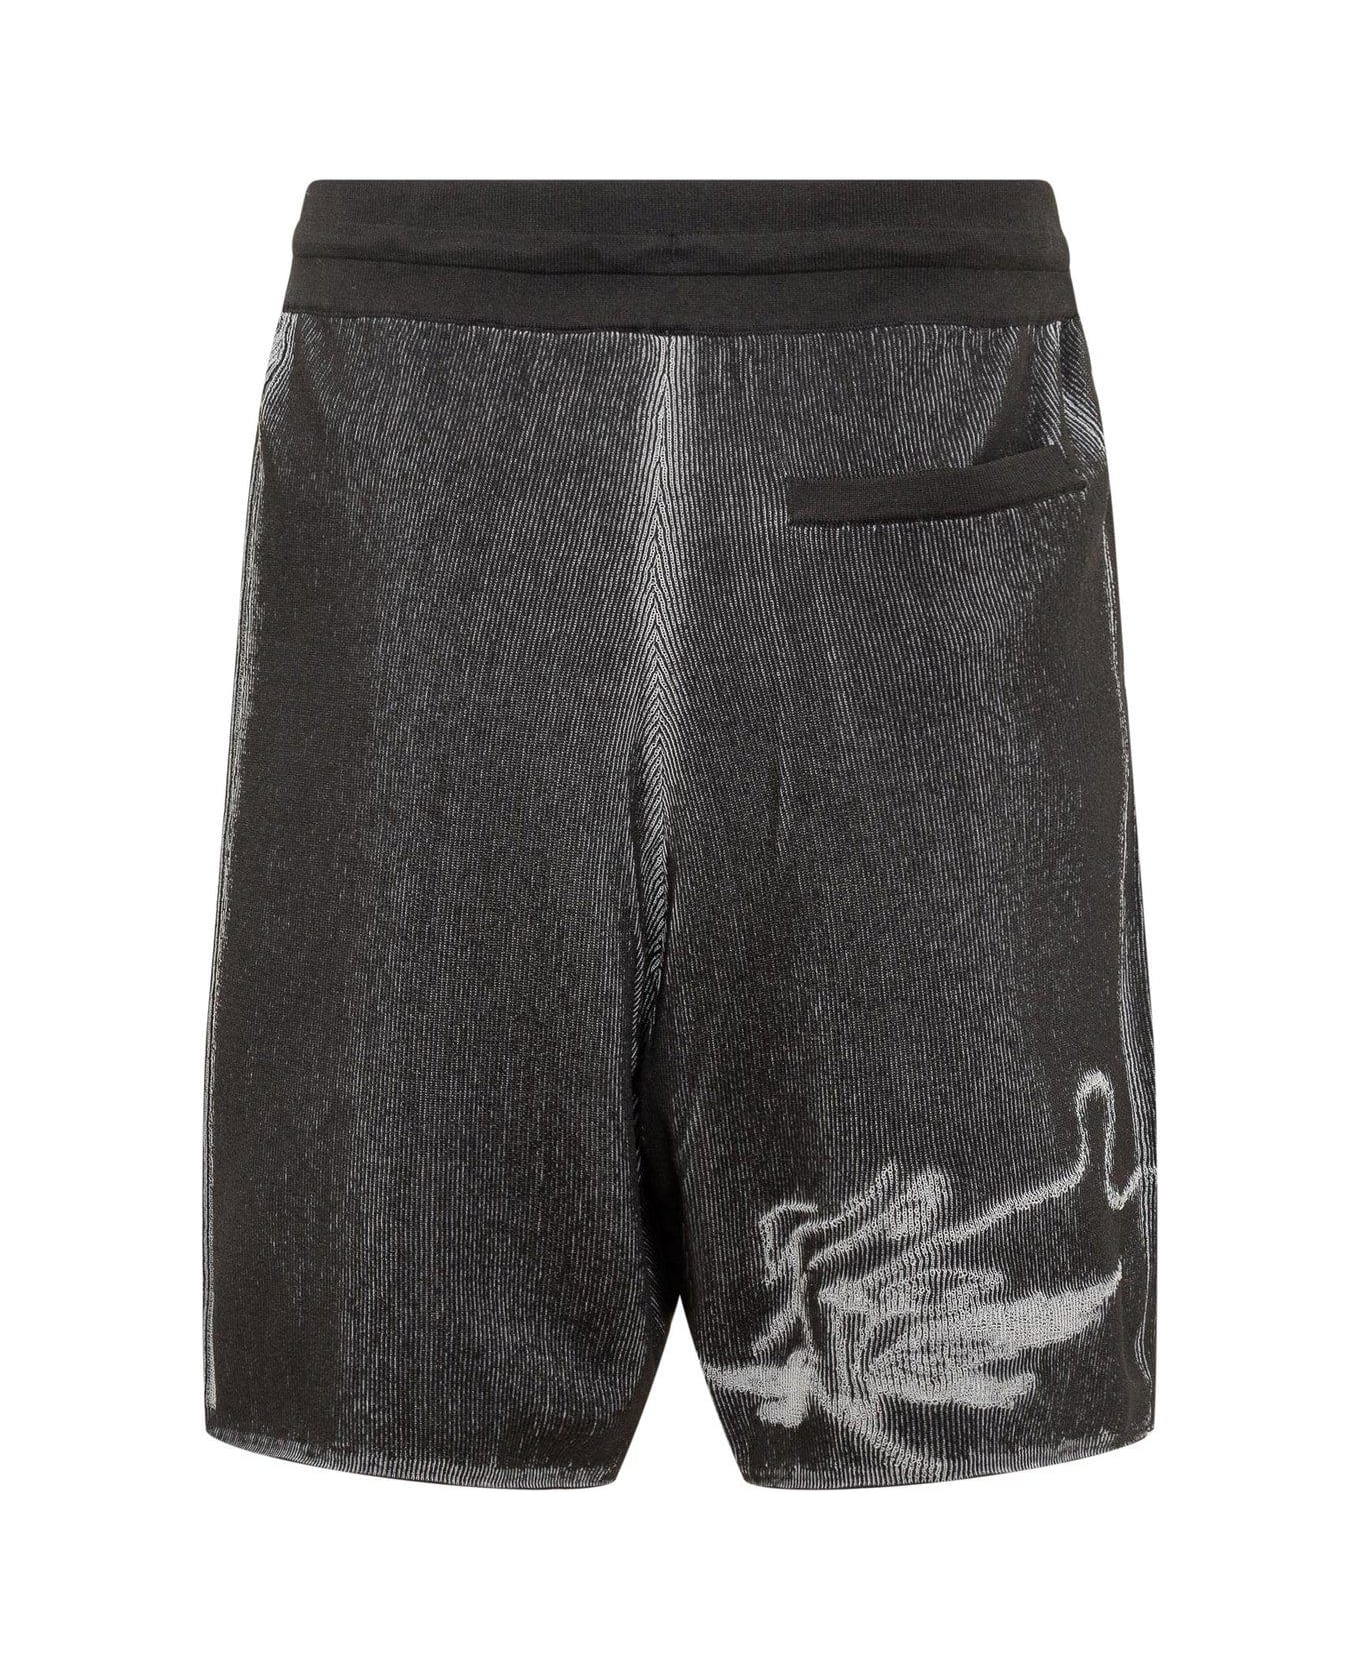 Y-3 Gfx Relaxed Fit Knit Shorts